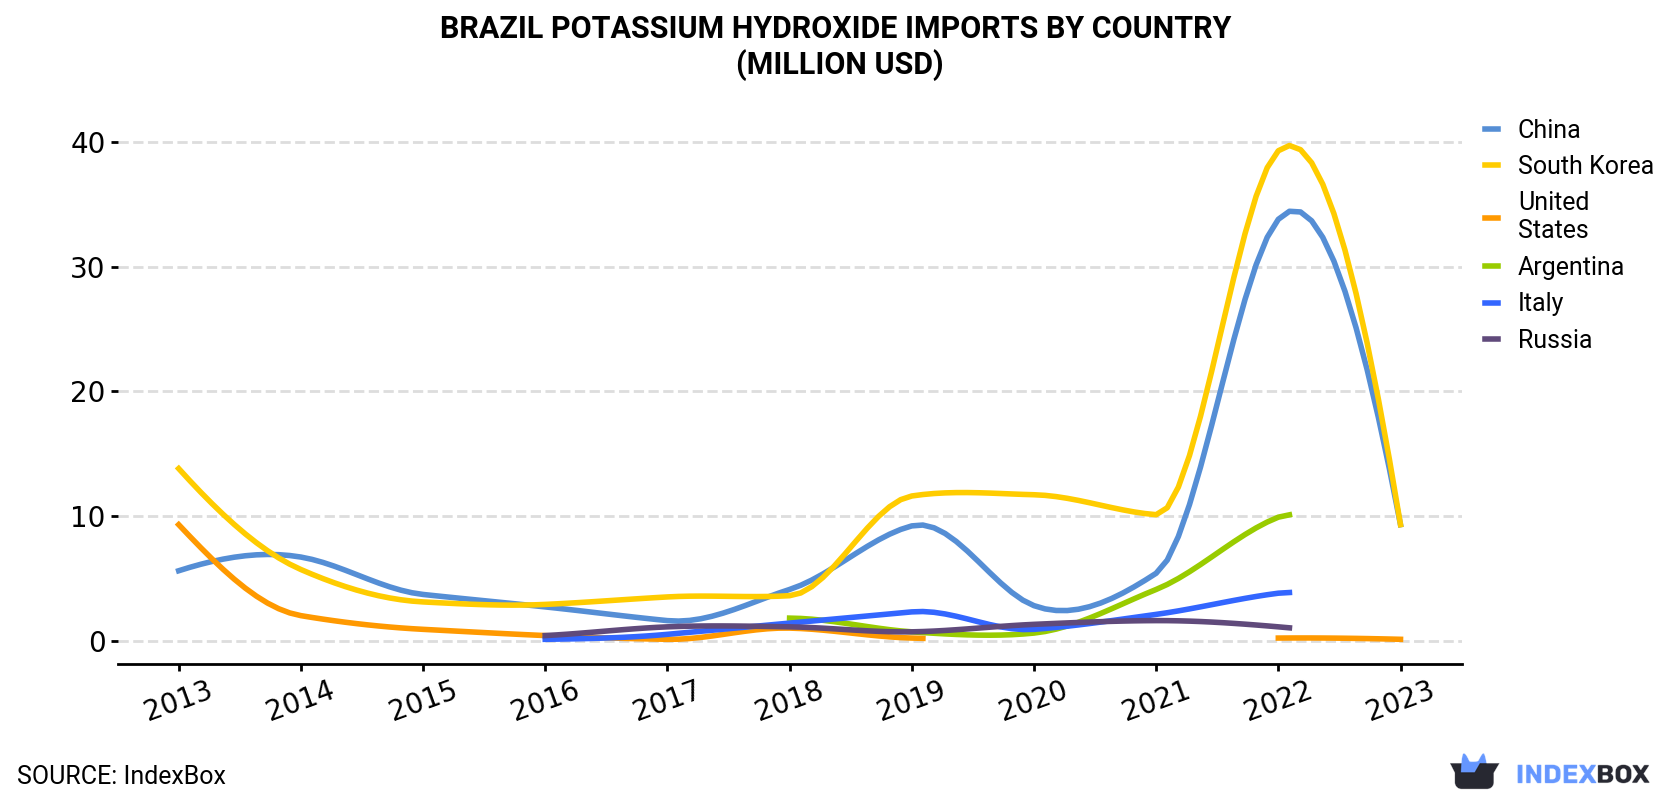 Brazil Potassium Hydroxide Imports By Country (Million USD)